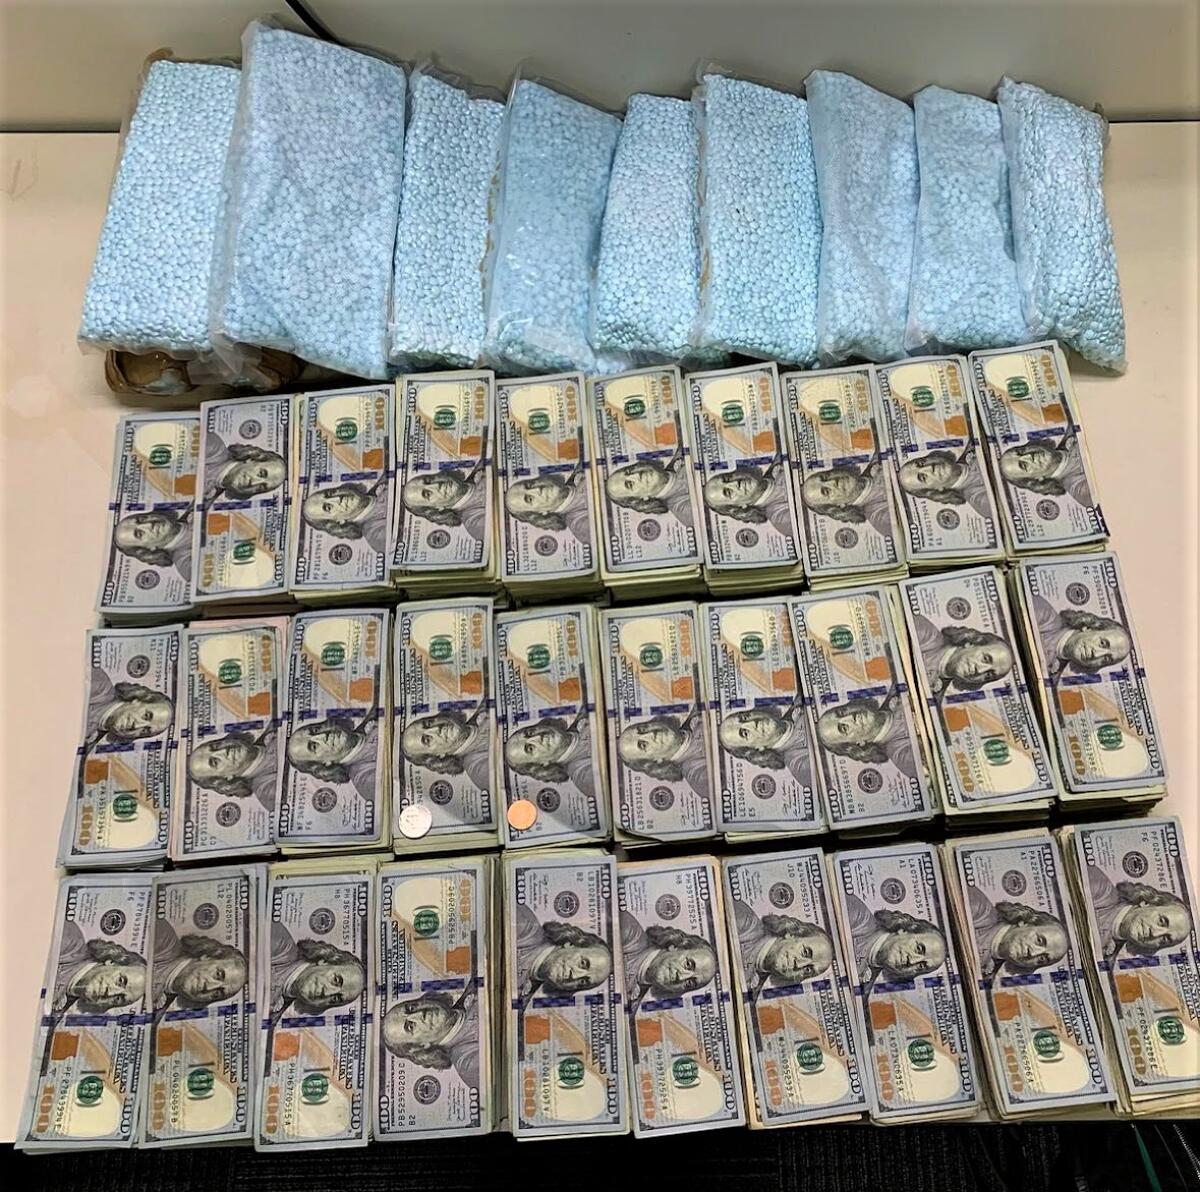 CMPD announced Friday its Special Investigations Unit had confiscated $138,000 and 60,000 fentanyl pills, arresting three.